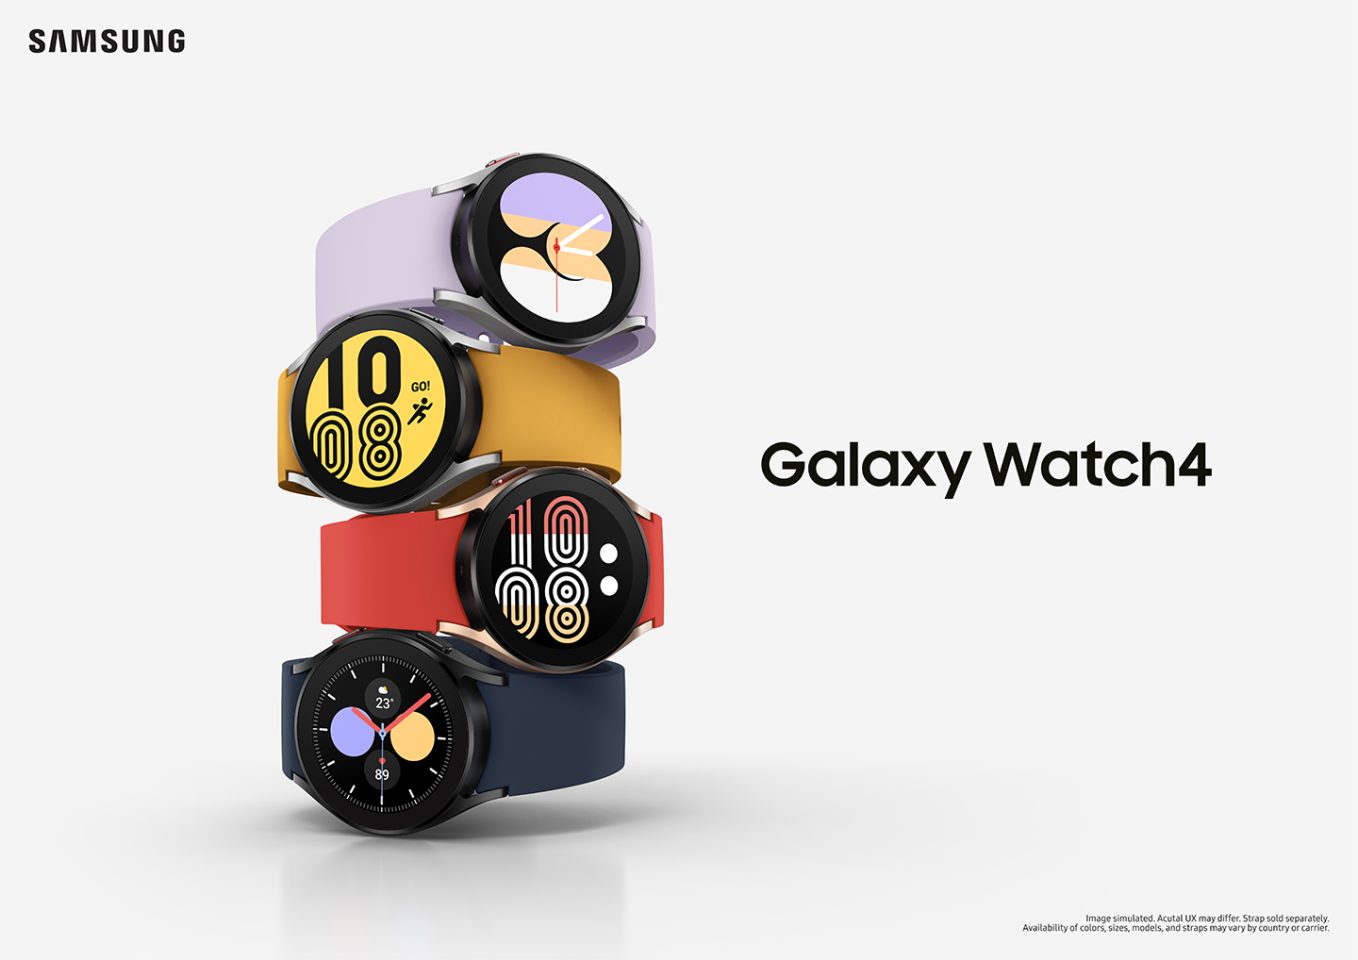 Key Visual of Galaxy Watch4 with updated features